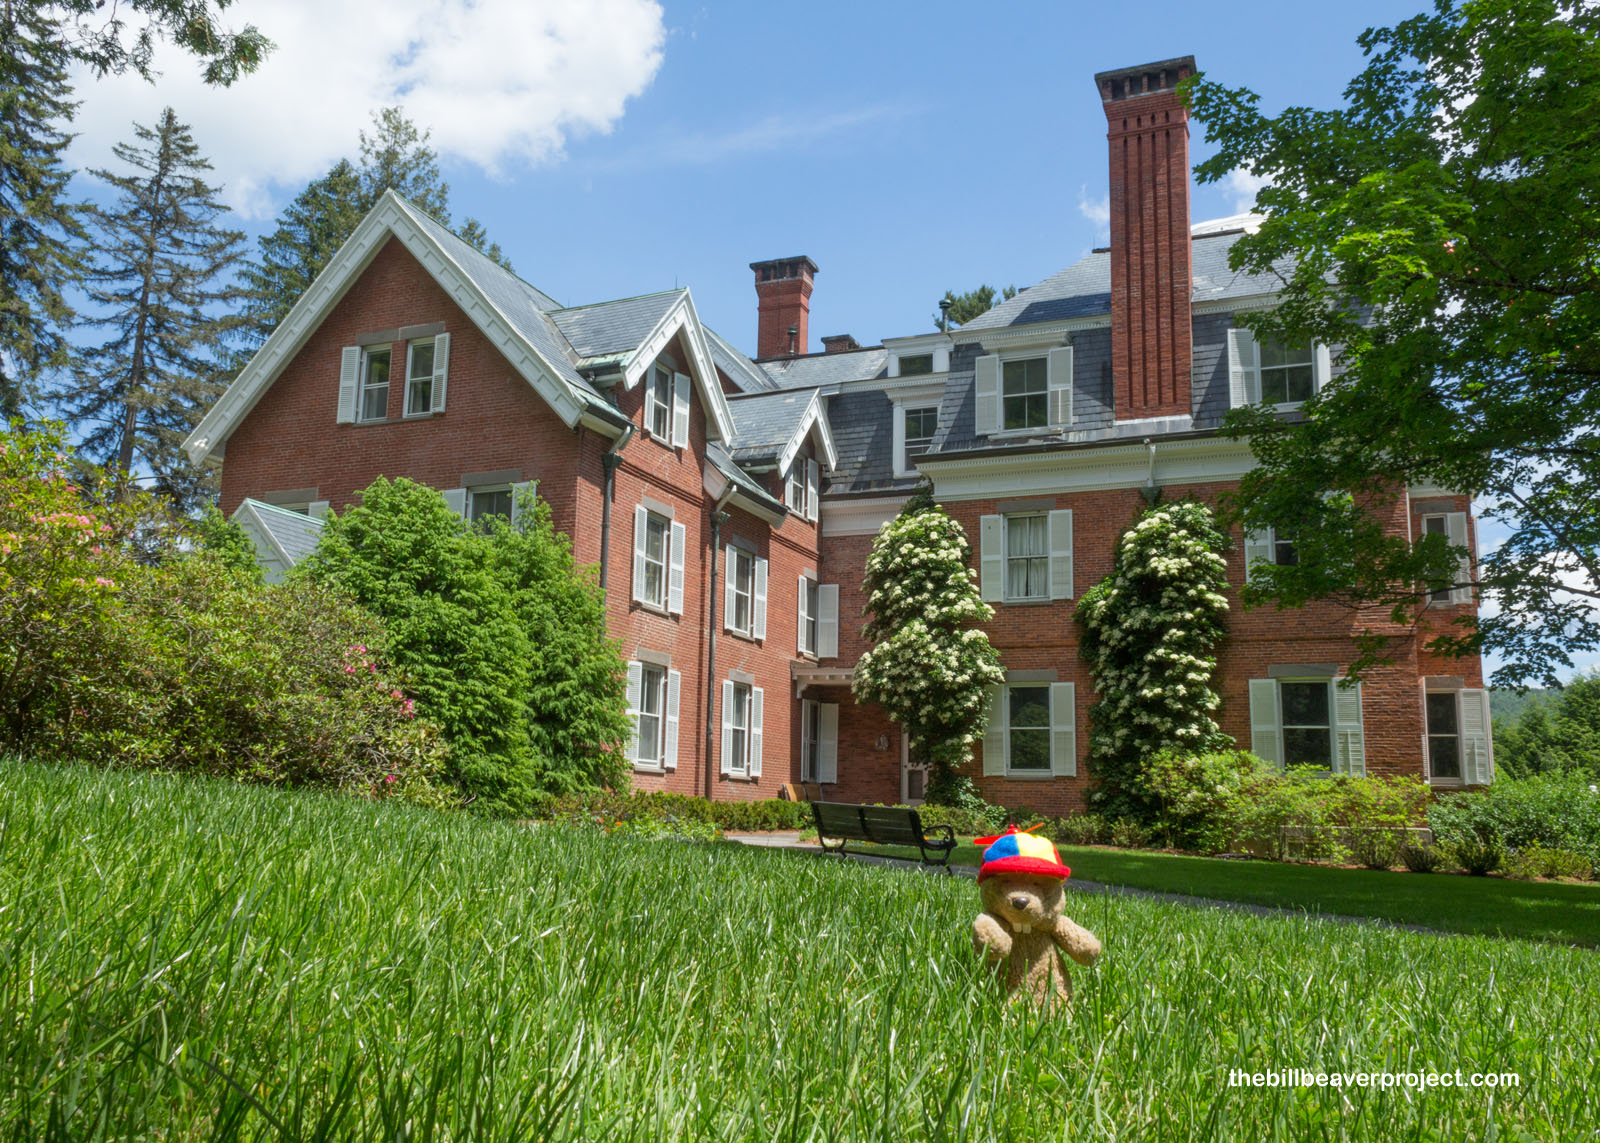 This mansion was home to the park's three big names!